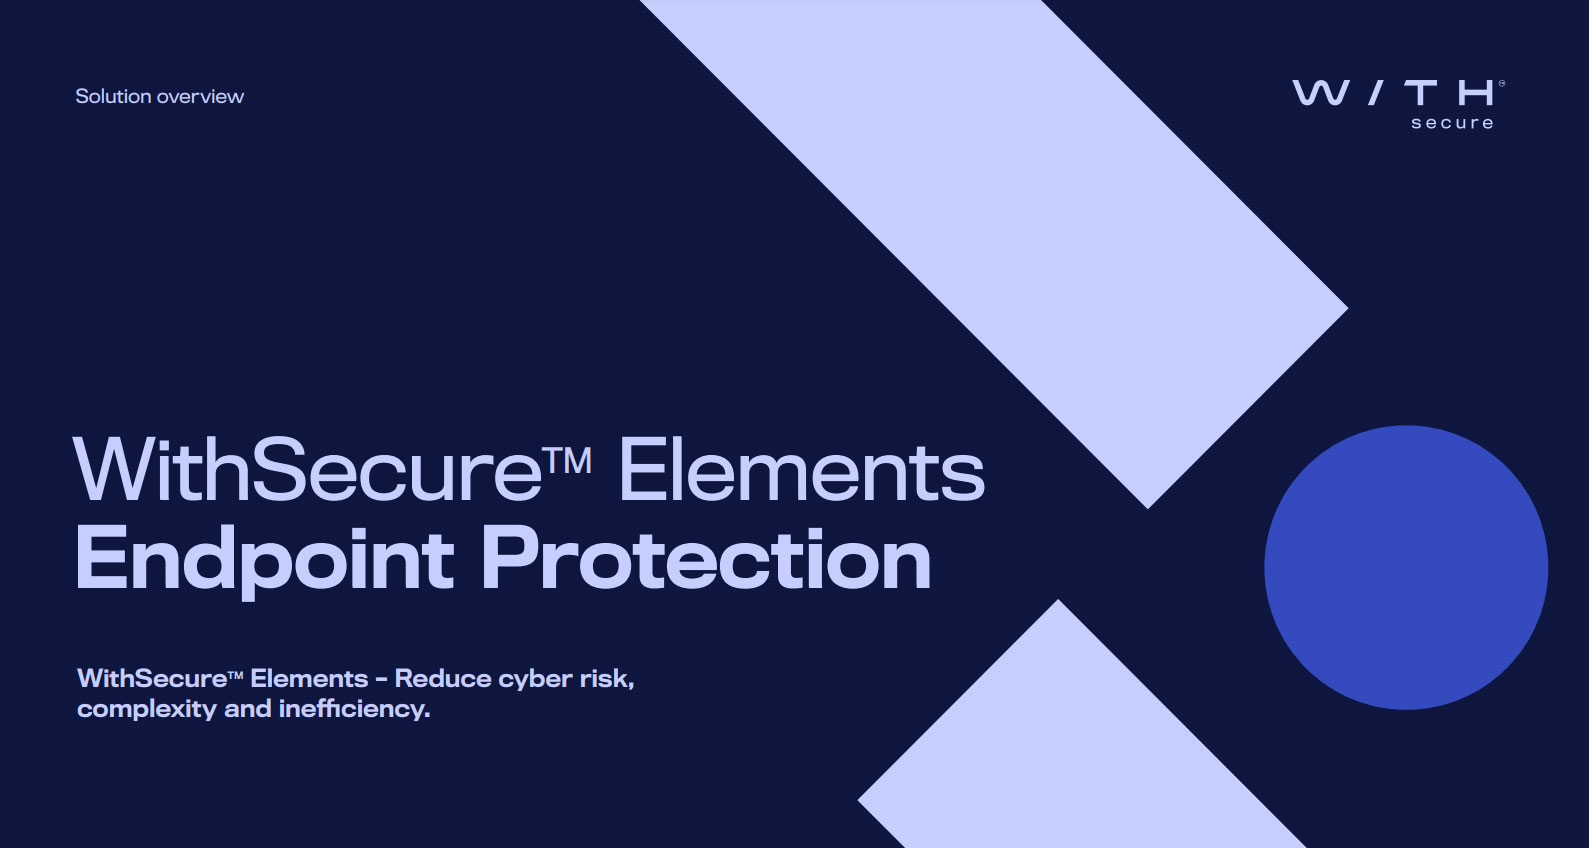 WS_elements_protection_solution_overview_EN